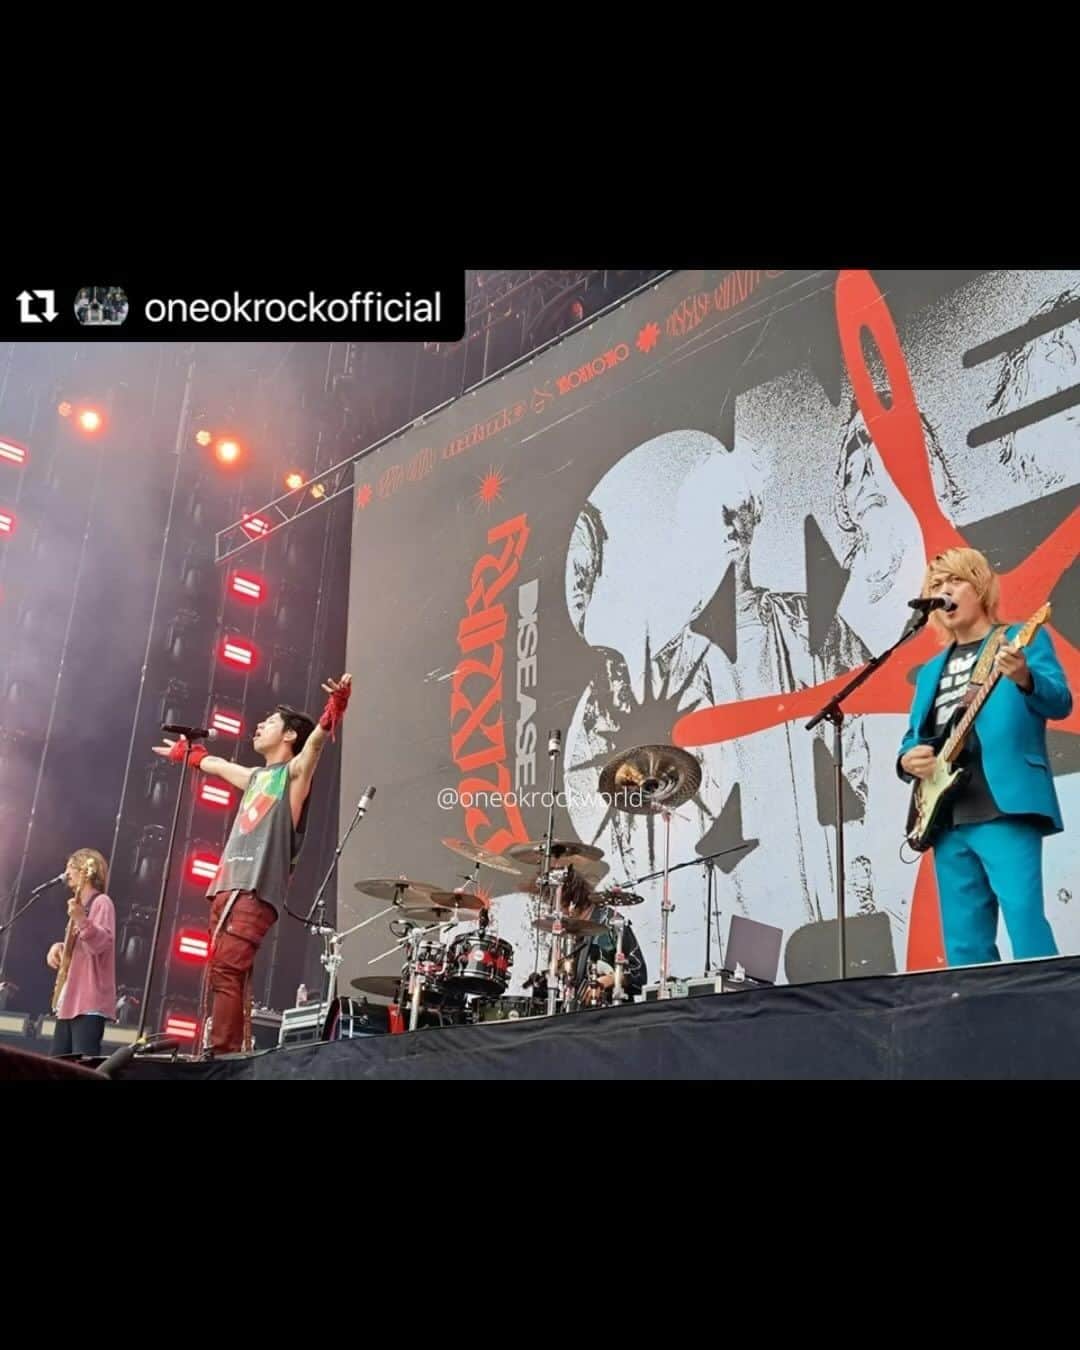 ONE OK ROCK WORLDのインスタグラム：「- ◆MUSE WILL OF THE PEOPLE EUROPE TOUR 2023 Day 4   #Repost  @oneokrockofficial  ・・・ Bordeaux!!  ボルドー!!  BORDEAUX!!  #ONEOKROCK #MUSE #Europe #tour  .  @10969taka ・・・  Bordeaux 🇫🇷 マジたのしかった。  I really enjoyed it.  .  @tomo_10969  ・・・ Bordeaux 🔥 Merci pour votre accueil chaleureux. On s'est bien amusé ! Merci à vous !☺️  ツアー後半戦はボルドーから🔥 最後まで楽しみながら、音を届けてきます  ボルドー🔥 温かく迎えてくれてありがとう。 とても楽しい時間を過ごしました！ ありがとう！☺️  Second half of the tour starts in Bordeaux🔥 I will enjoy and bring the sound to the end.  Bordeaux🔥 Thank you for the warm welcome 🔥 I had a really good time!  Thank you ☺️  @muse @oneokrockofficial @kazulenphoto 📸  #WILLOFTHEPEOPLEEUROPETOUR2023 # #luxurydisease #oneokrock #drummer  .  @toru_10969  ・・・ So much fun last night! Bordeaux 🇫🇷  昨夜はとても楽しかった！ ボルドー🇫🇷  #willofthepeople #muse  - #WILLOFTHEPEOPLEEUROPETOUR2023 #Bordeaux #oneokrockofficial#10969taka#toru_10969#tomo_10969#ryota_0809#fueledbyramen#luxurydisease」